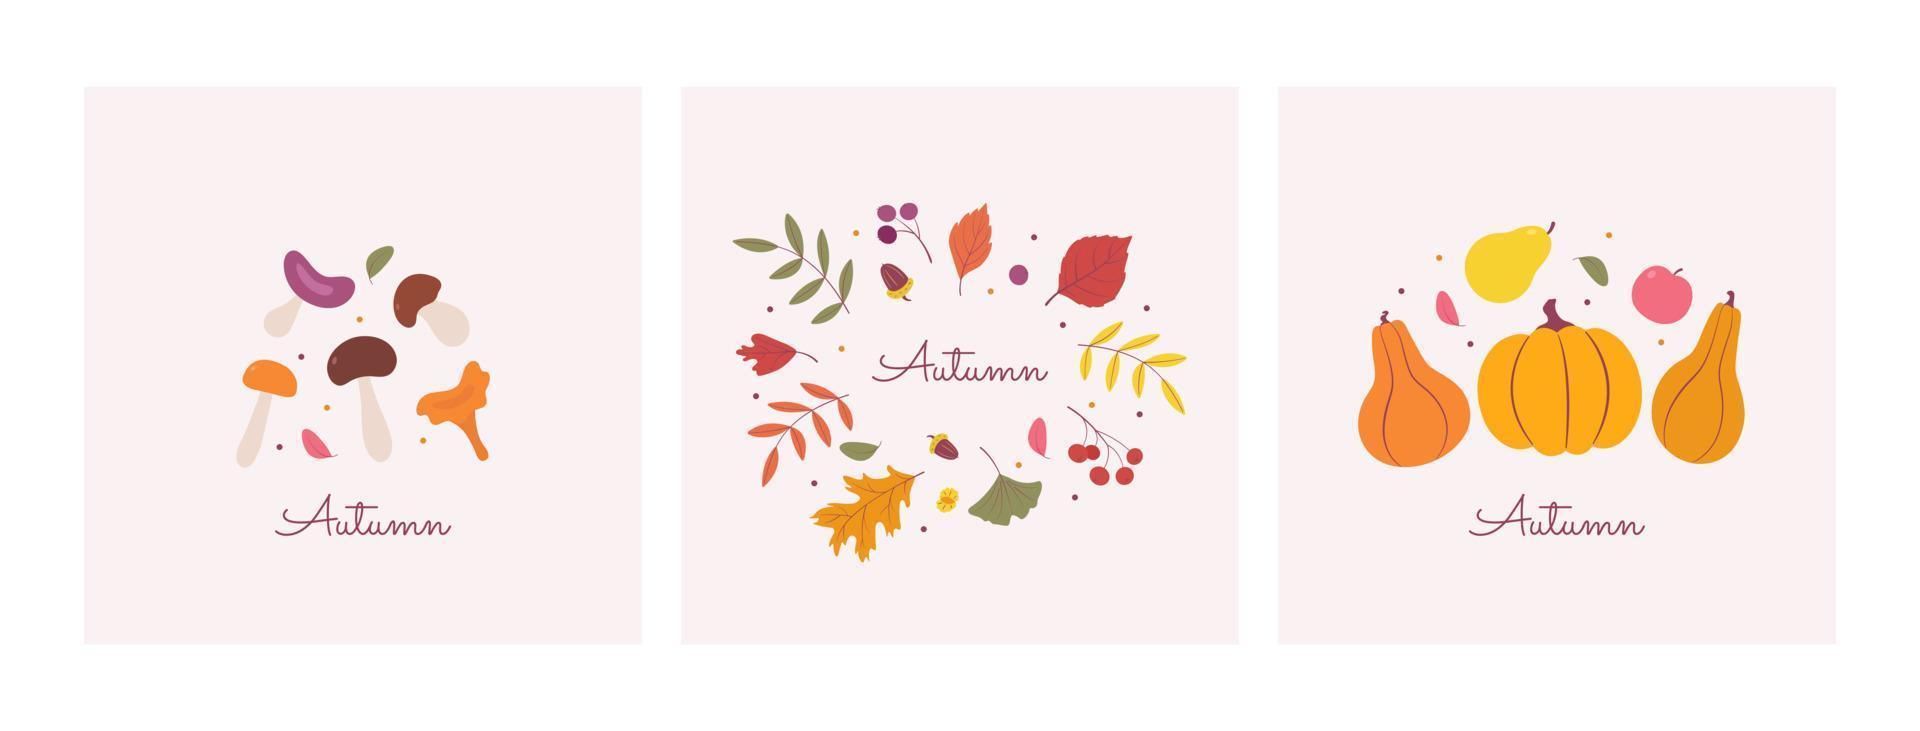 Greeting card of autumn mood. A set of minimalistic posters with leaves of nature, mushrooms, pumpkins, berries. Autumn banner. Vector illustration in a flat cartoon style